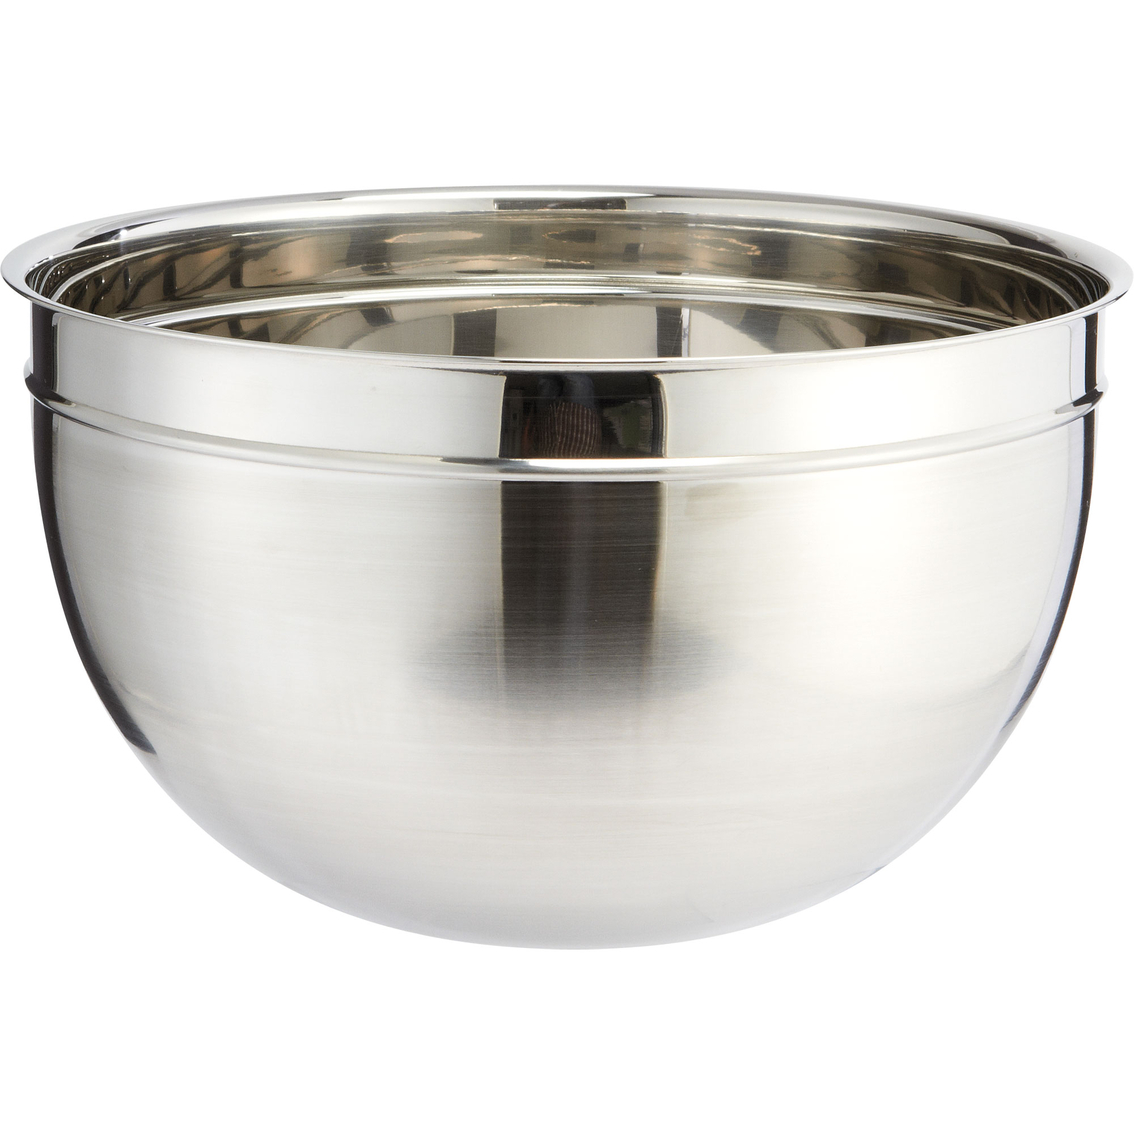 Simply Perfect 3 pc. Mixing Bowl Set - Image 2 of 4